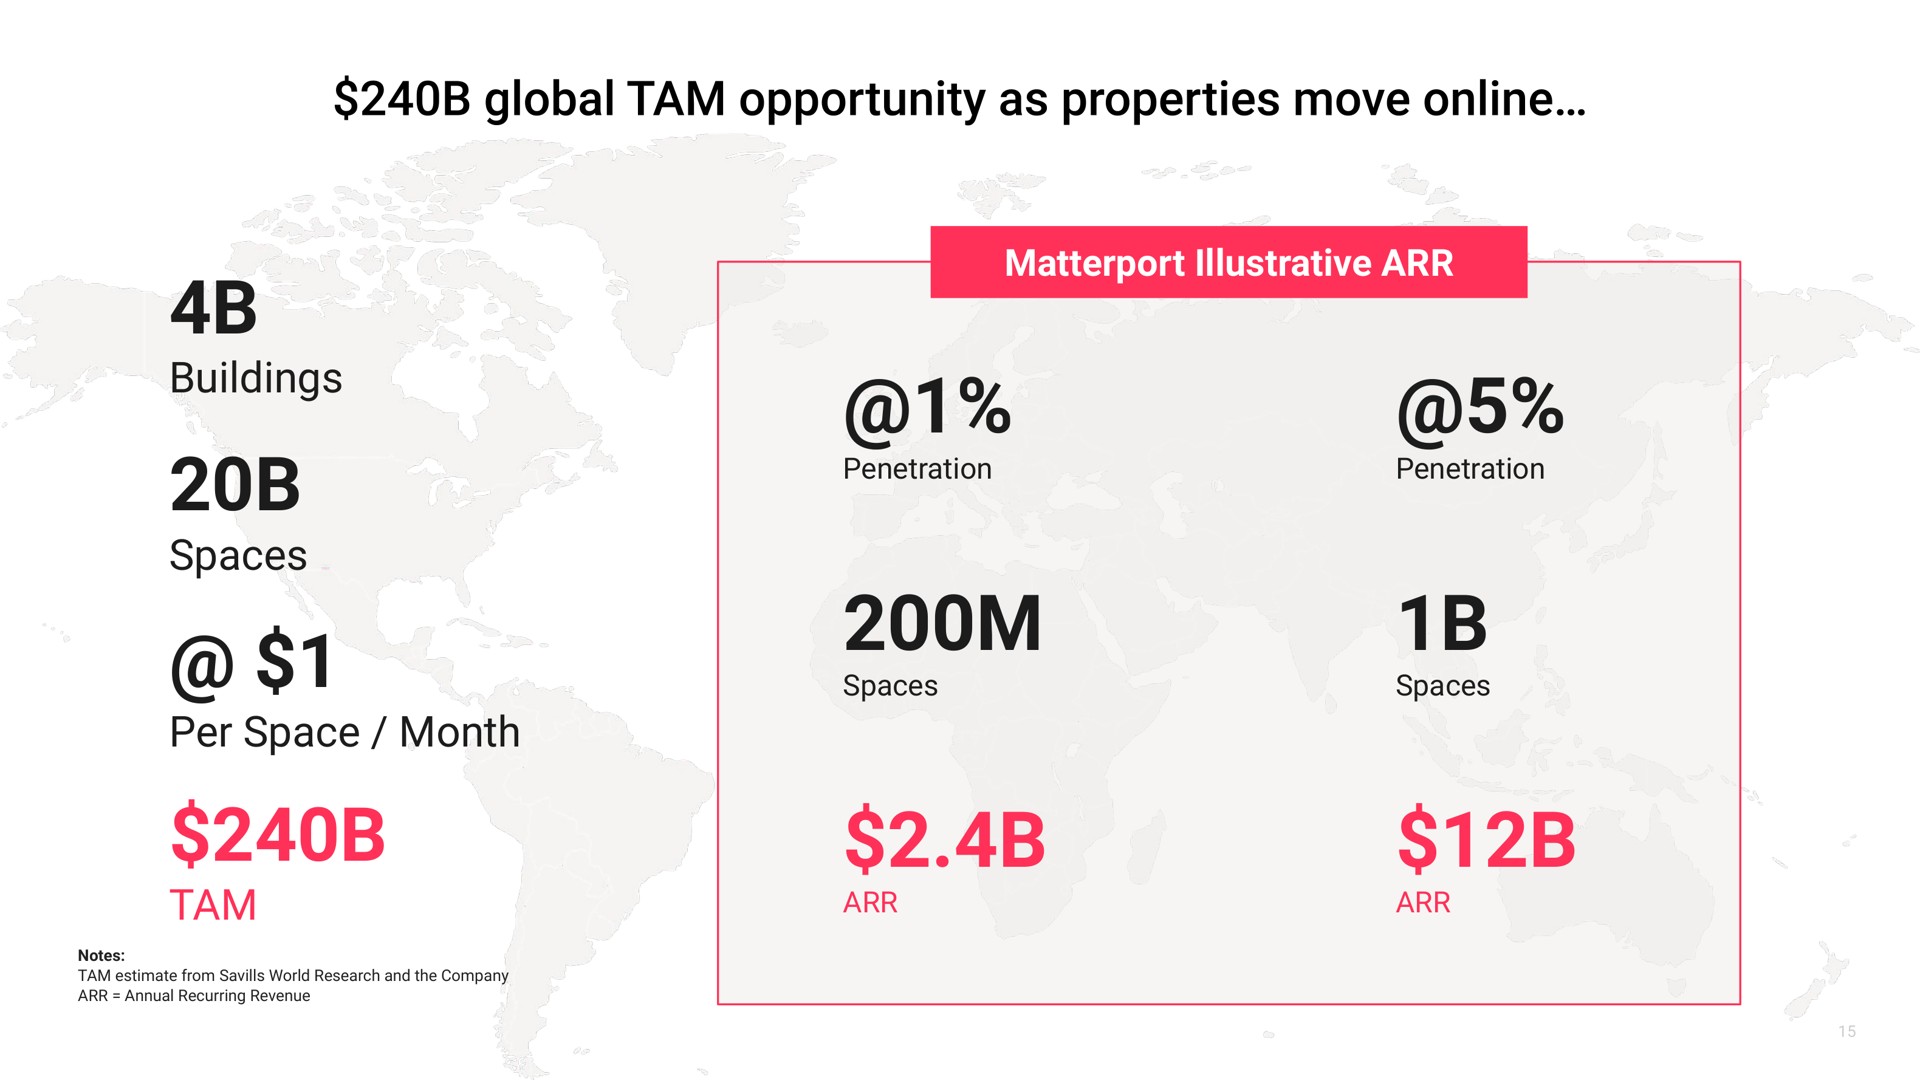 buildings spaces per space month tam illustrative global opportunity as properties move | Matterport